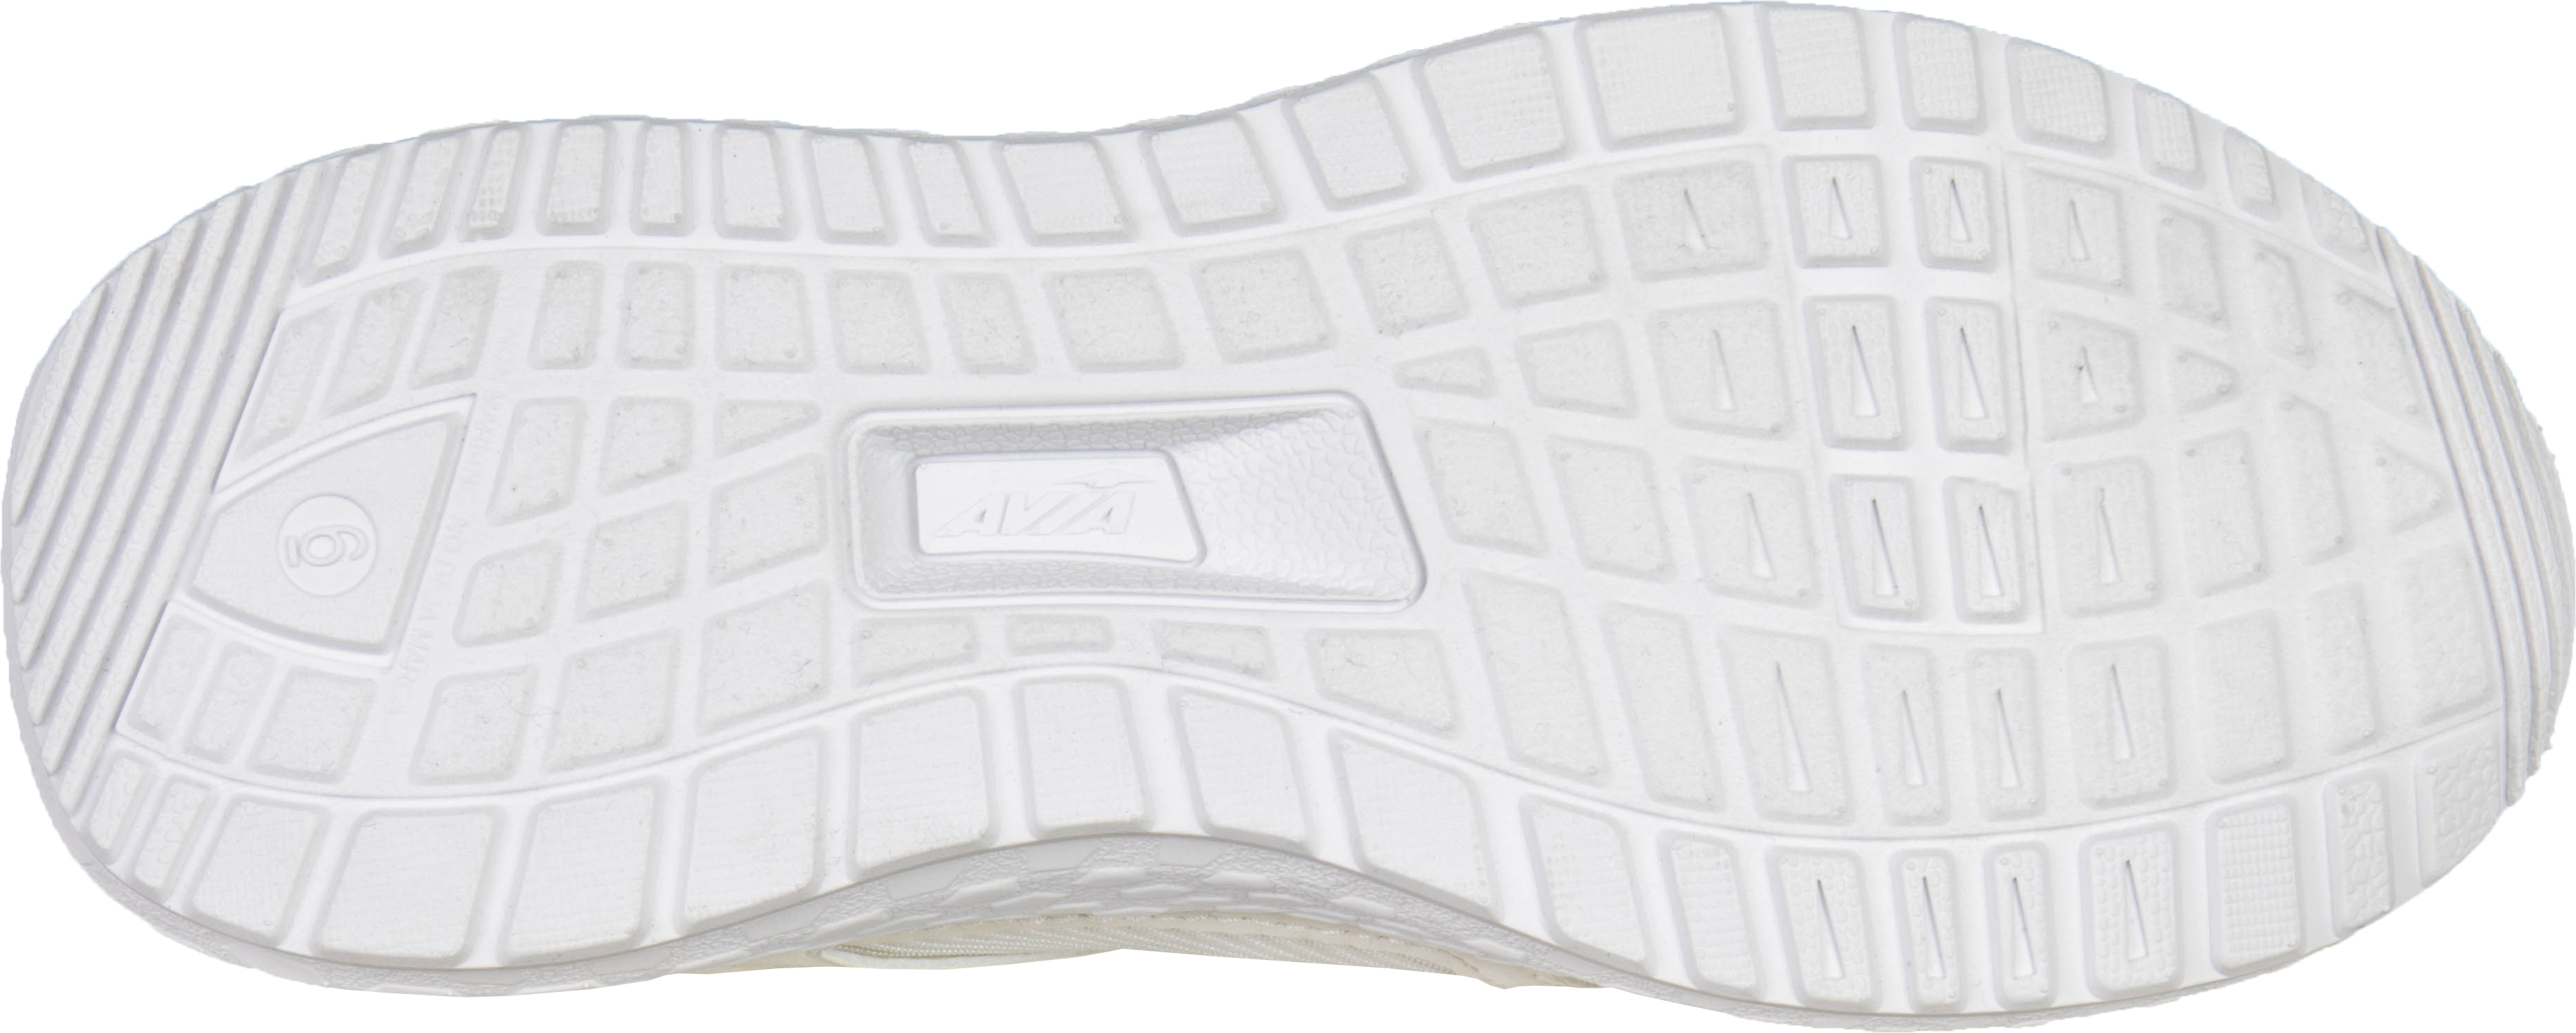 Women's Avia Caged Knit Sneaker - image 3 of 5